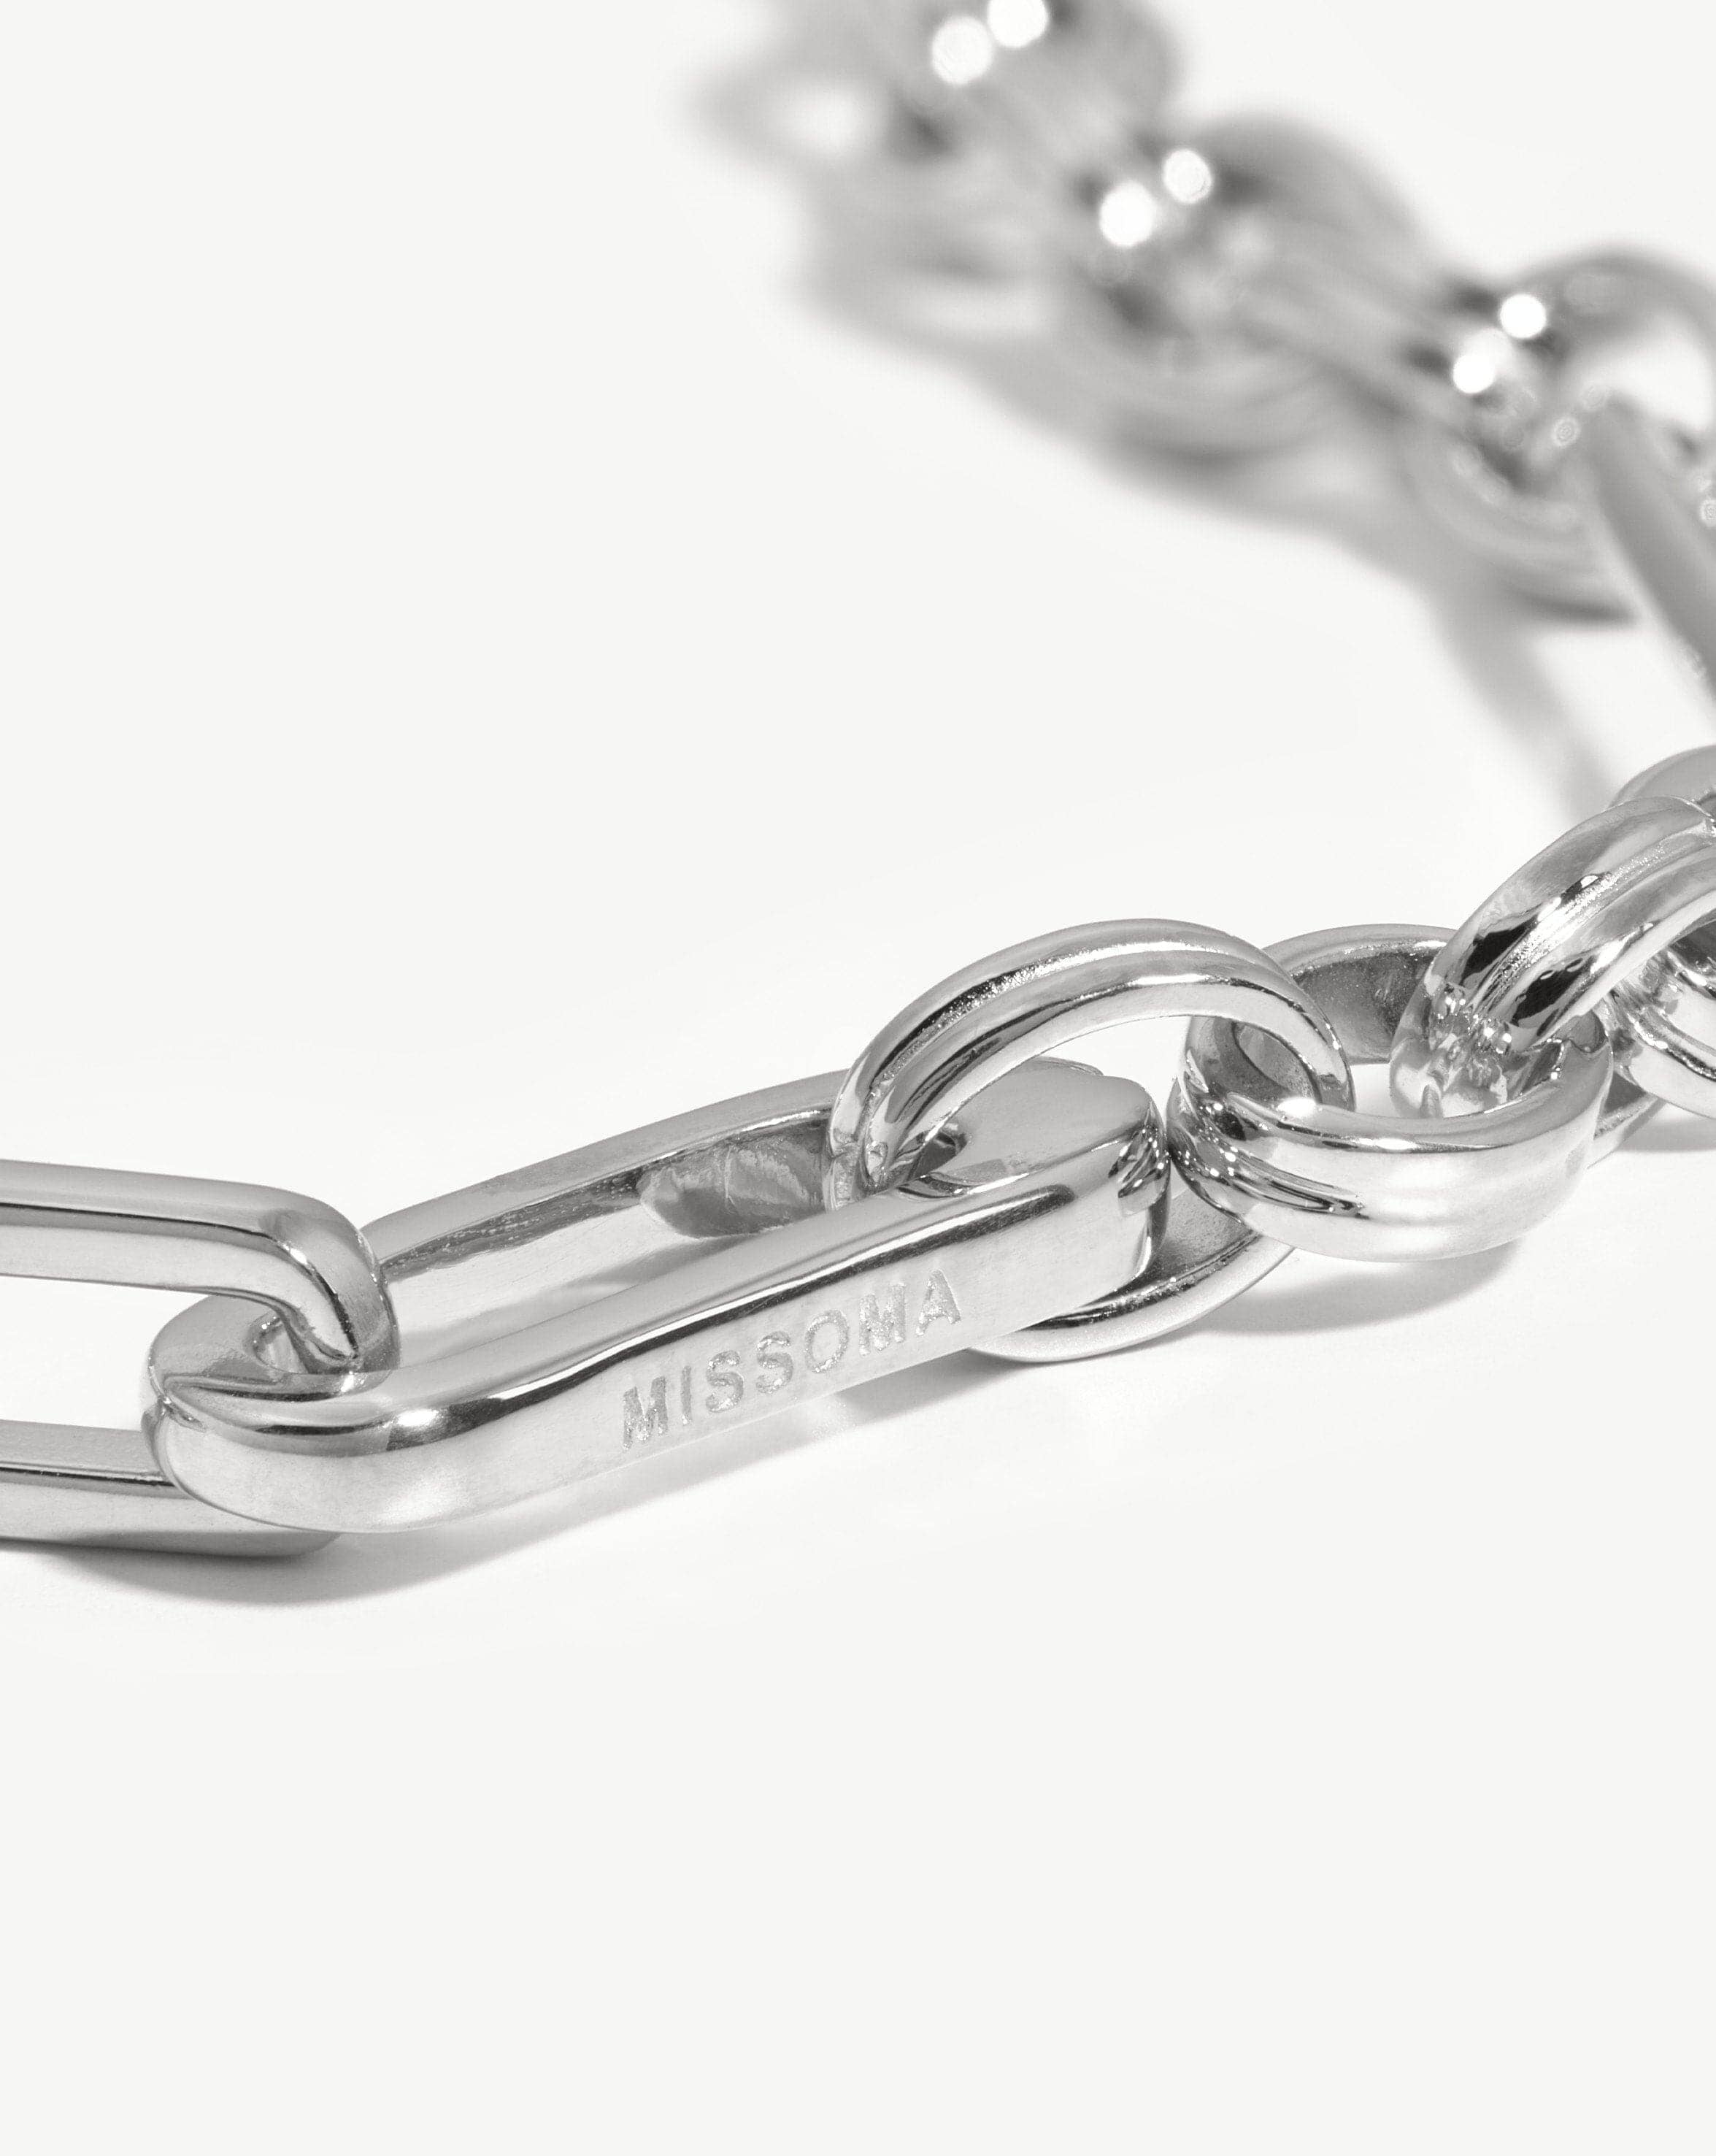 Axiom Chain Necklace | Silver Plated Necklaces Missoma 